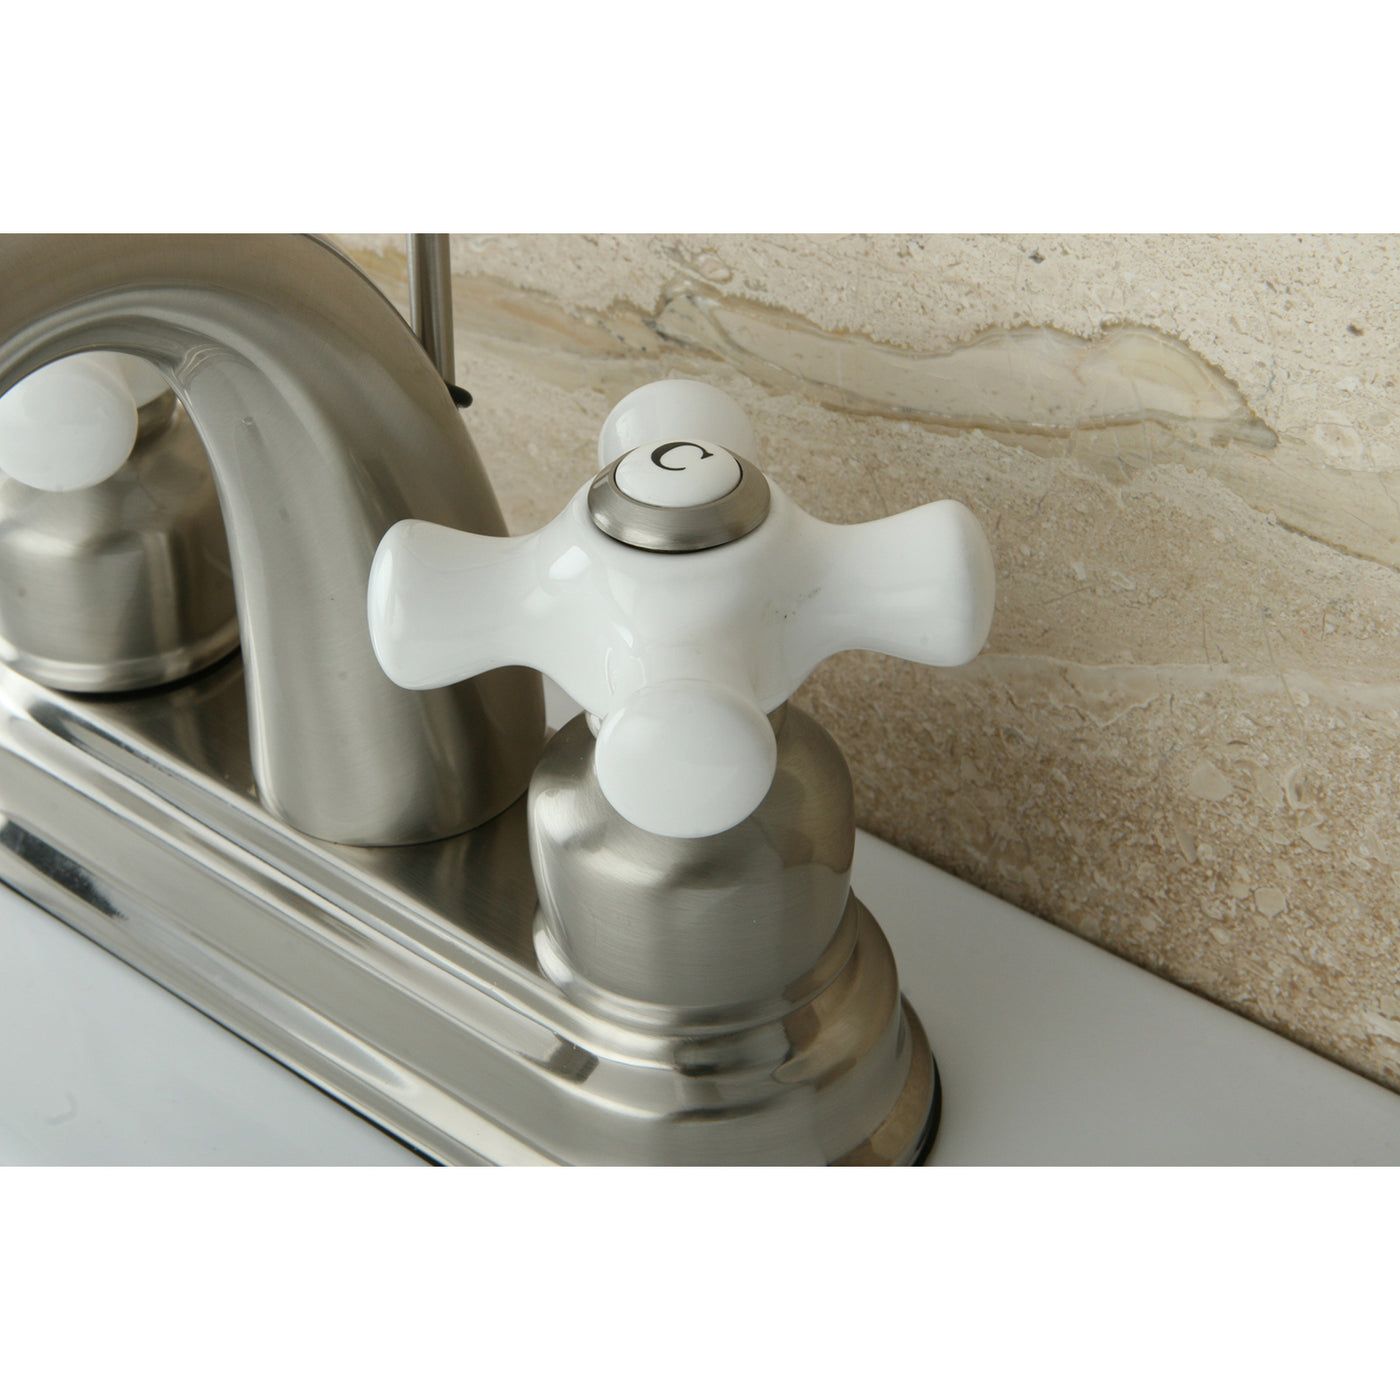 Elements of Design EB5618PX 4-Inch Centerset Bathroom Faucet, Brushed Nickel